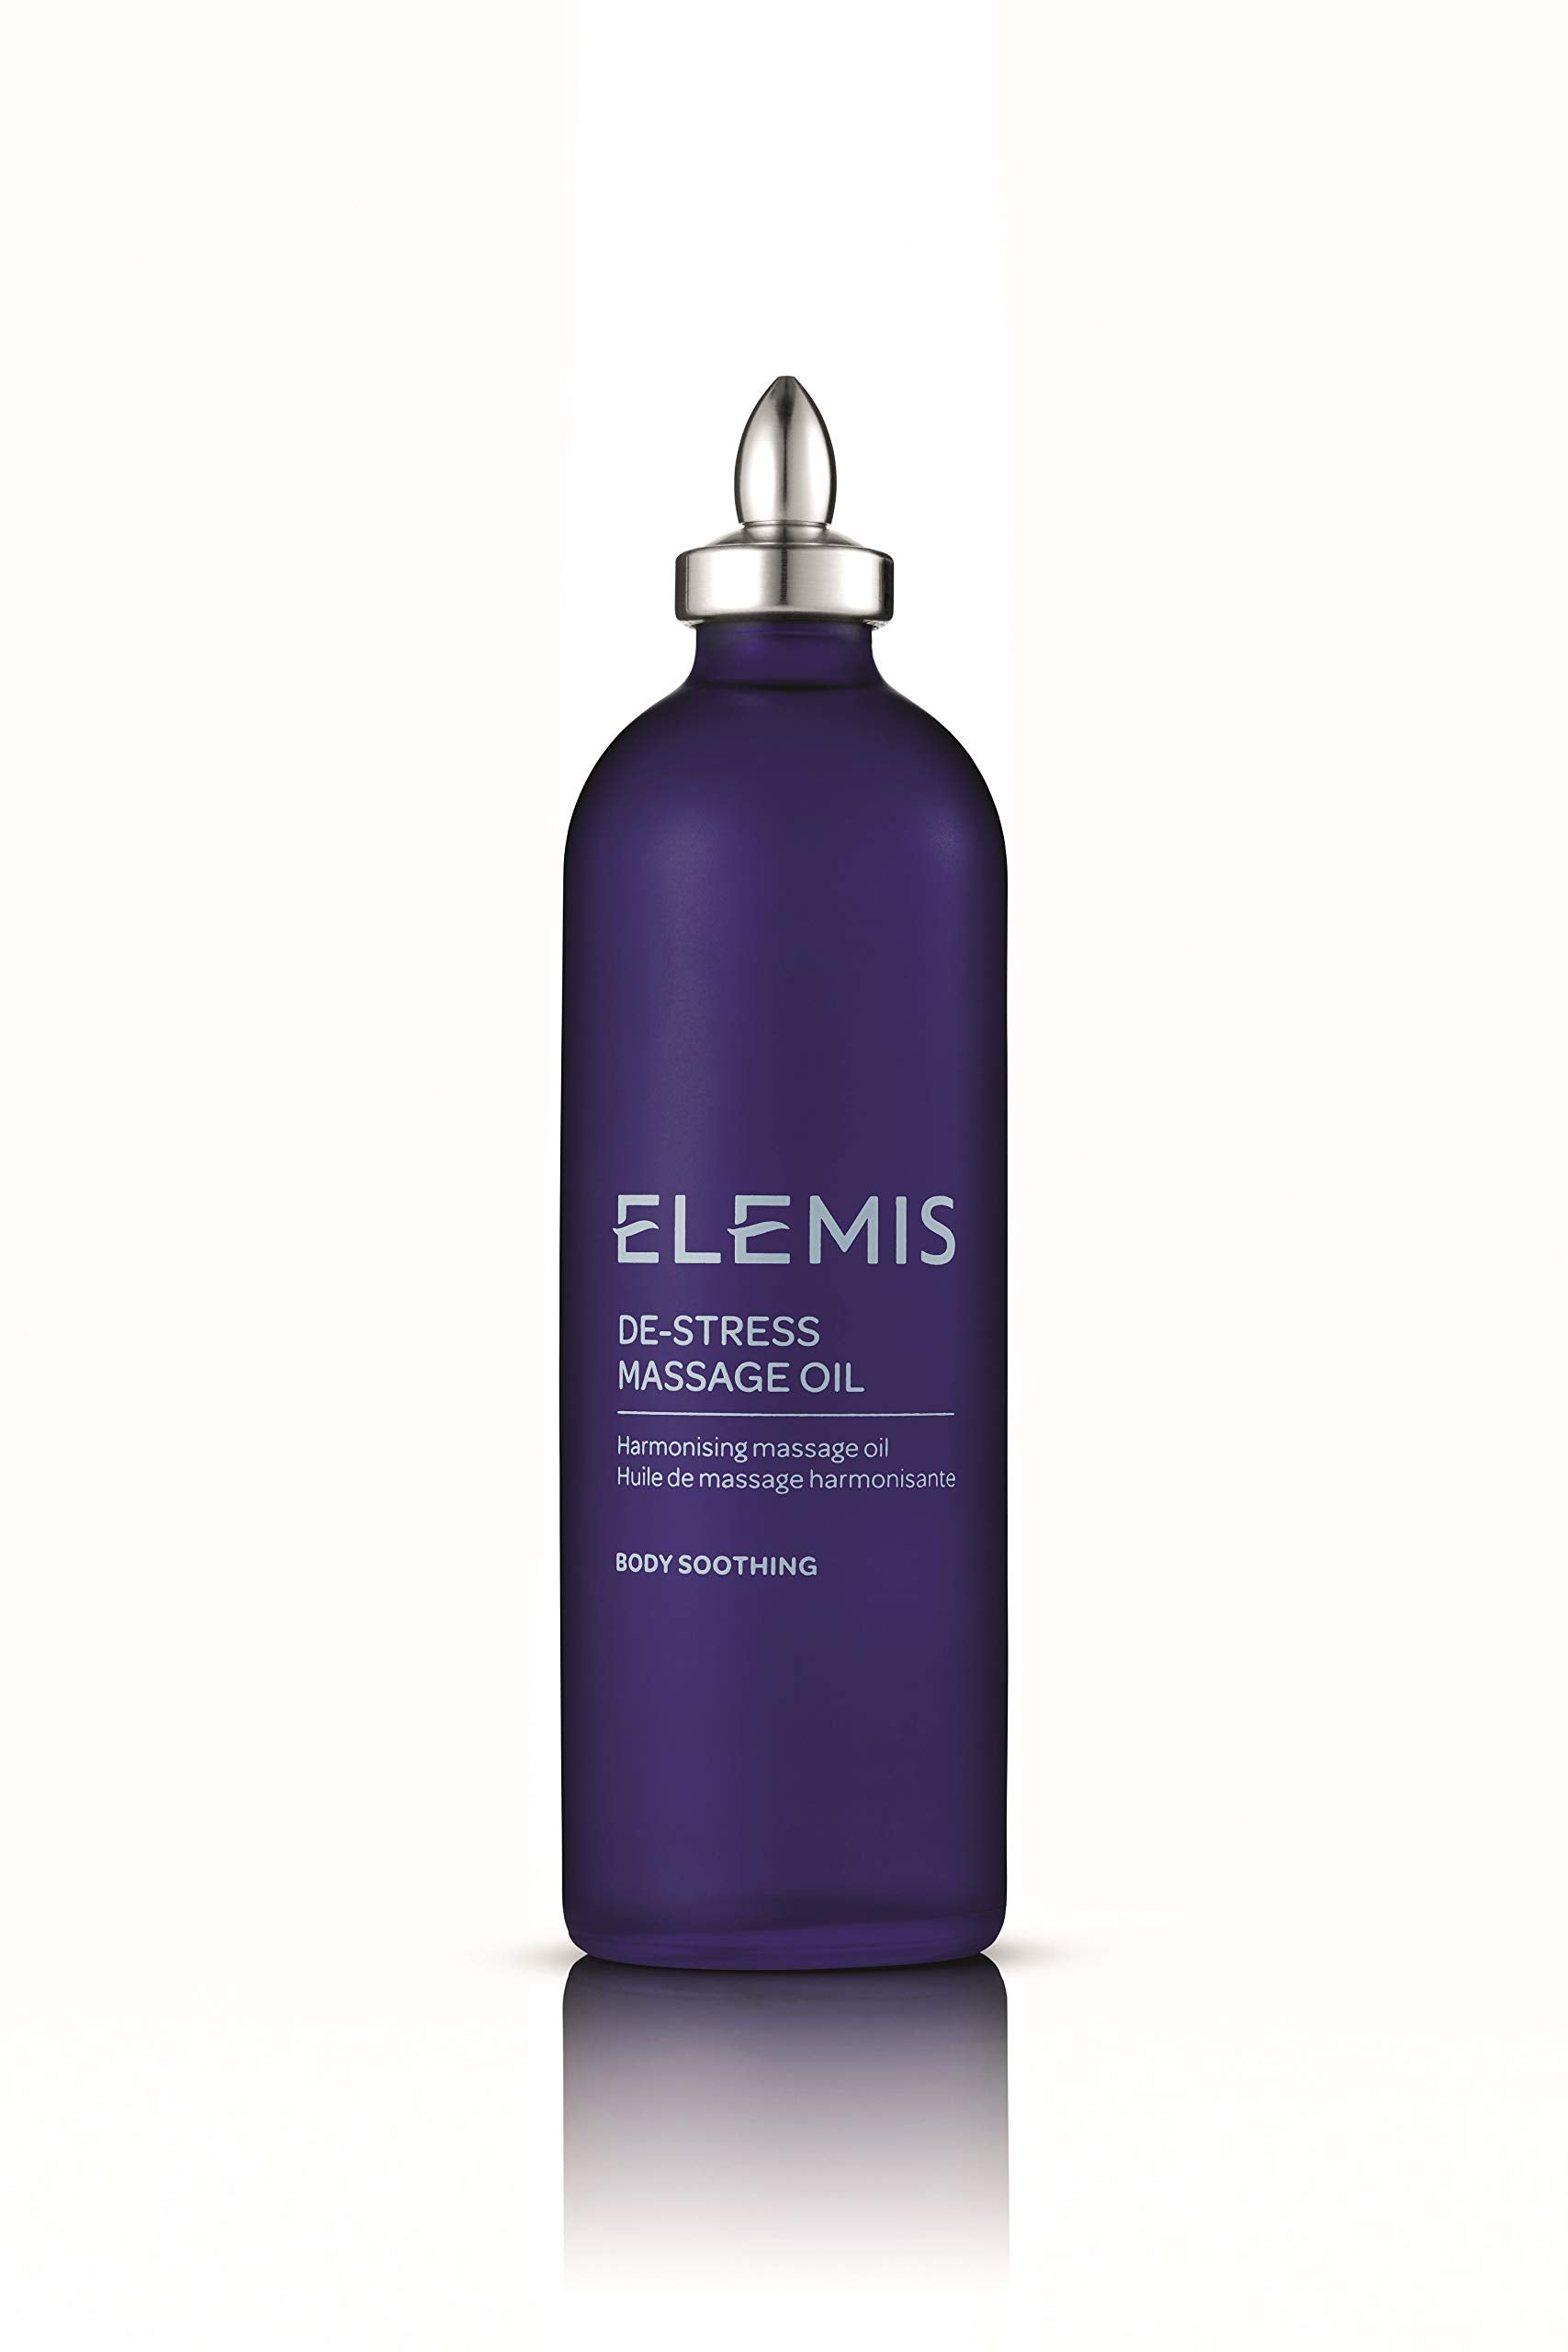 ELEMIS De-Stress Massage Oil, Relaxing Body Oil to Melt Tension and Harmonise the Body, Deeply Nourishing Massage Oil Made with Pure Essential Oils, Hydrating Body Oil for Women and Men, 100ml